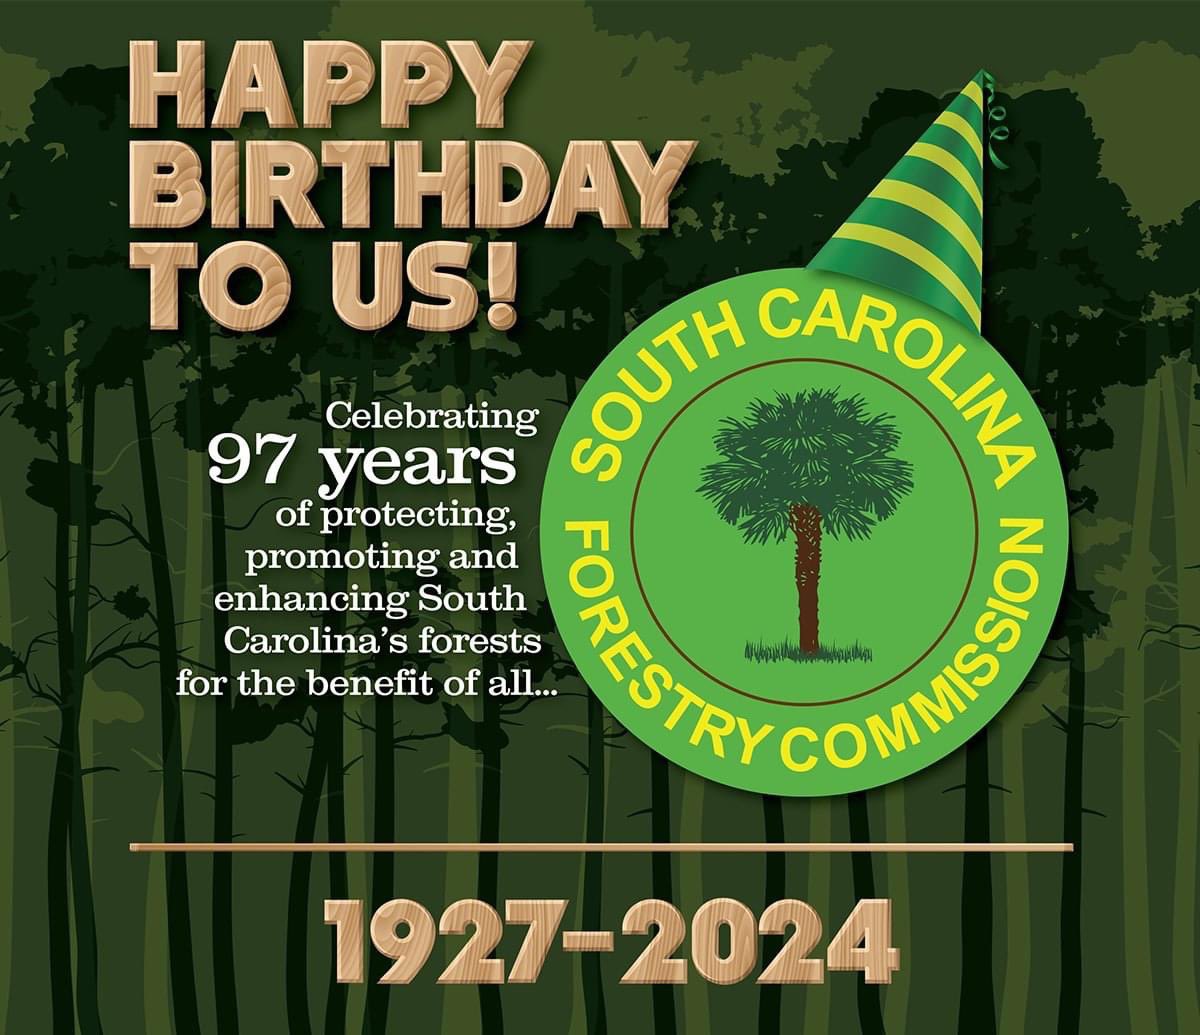 Friday, April 26, 2024 marks 97 years to the day that the South Carolina Forestry Commission was founded with the mission of protecting, promoting and enhancing South Carolina’s forests for the benefit of all.